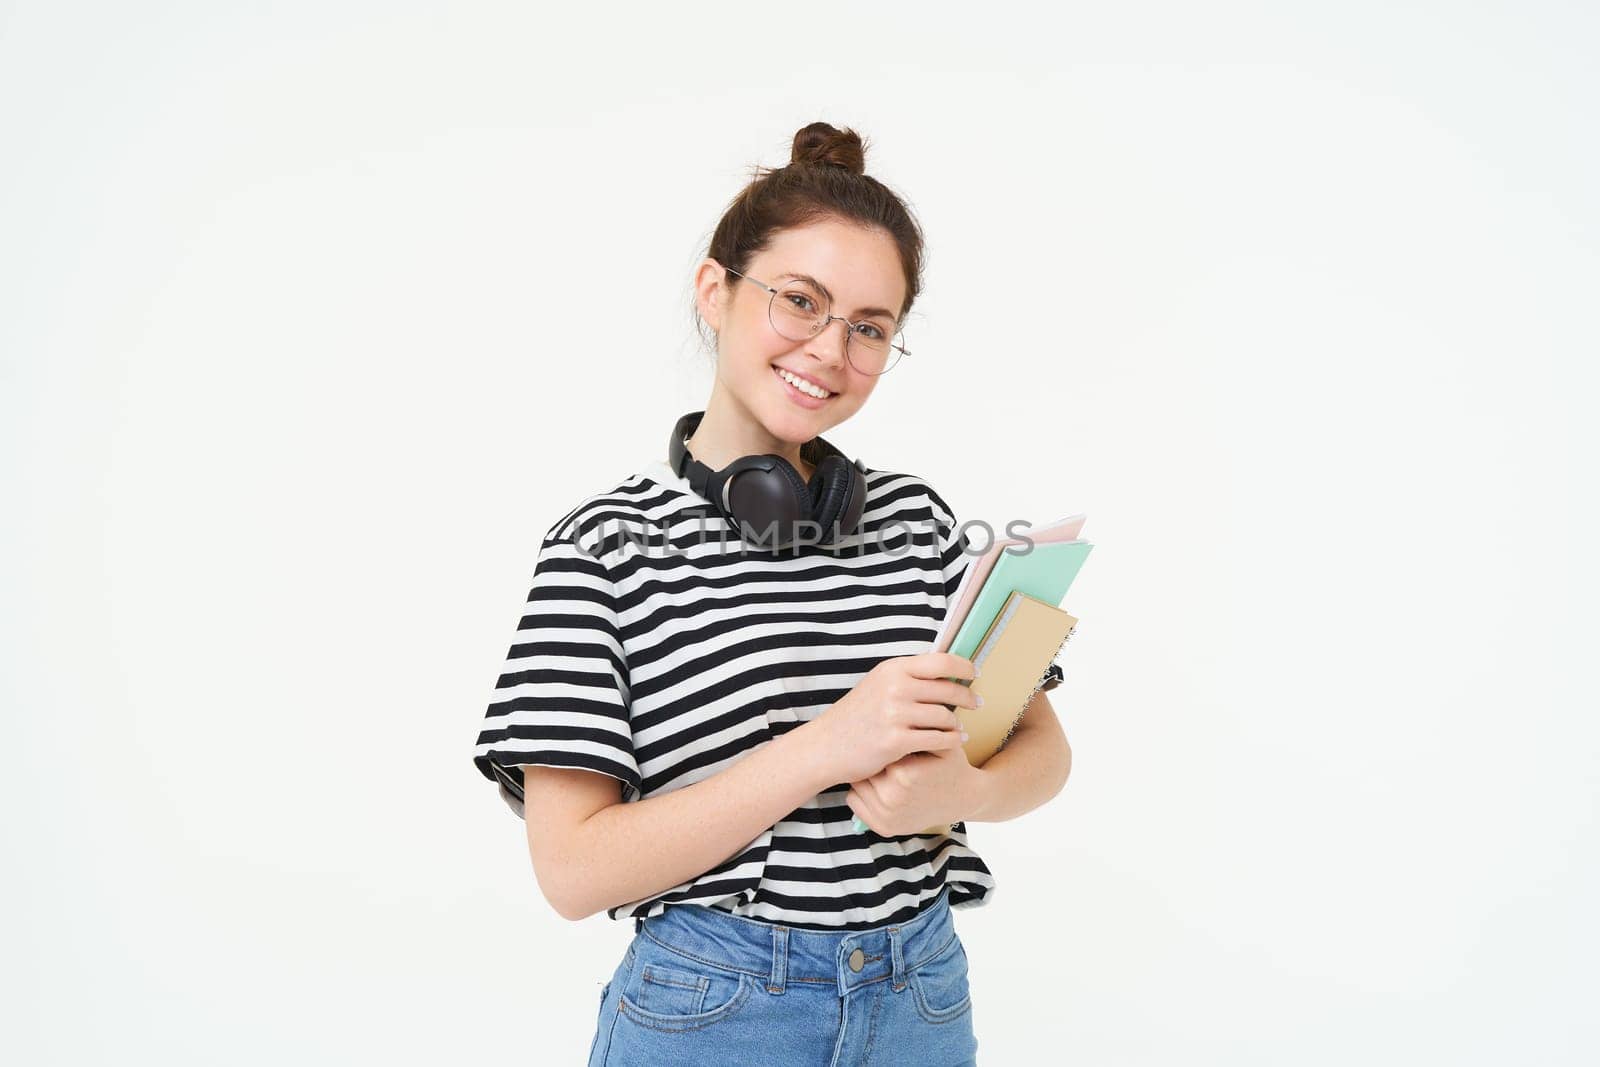 Education concept. Smiling brunette girl, student in casual clothes, holds her books, study material, wears headphones over neck, looks confident and happy, isolated over white background.